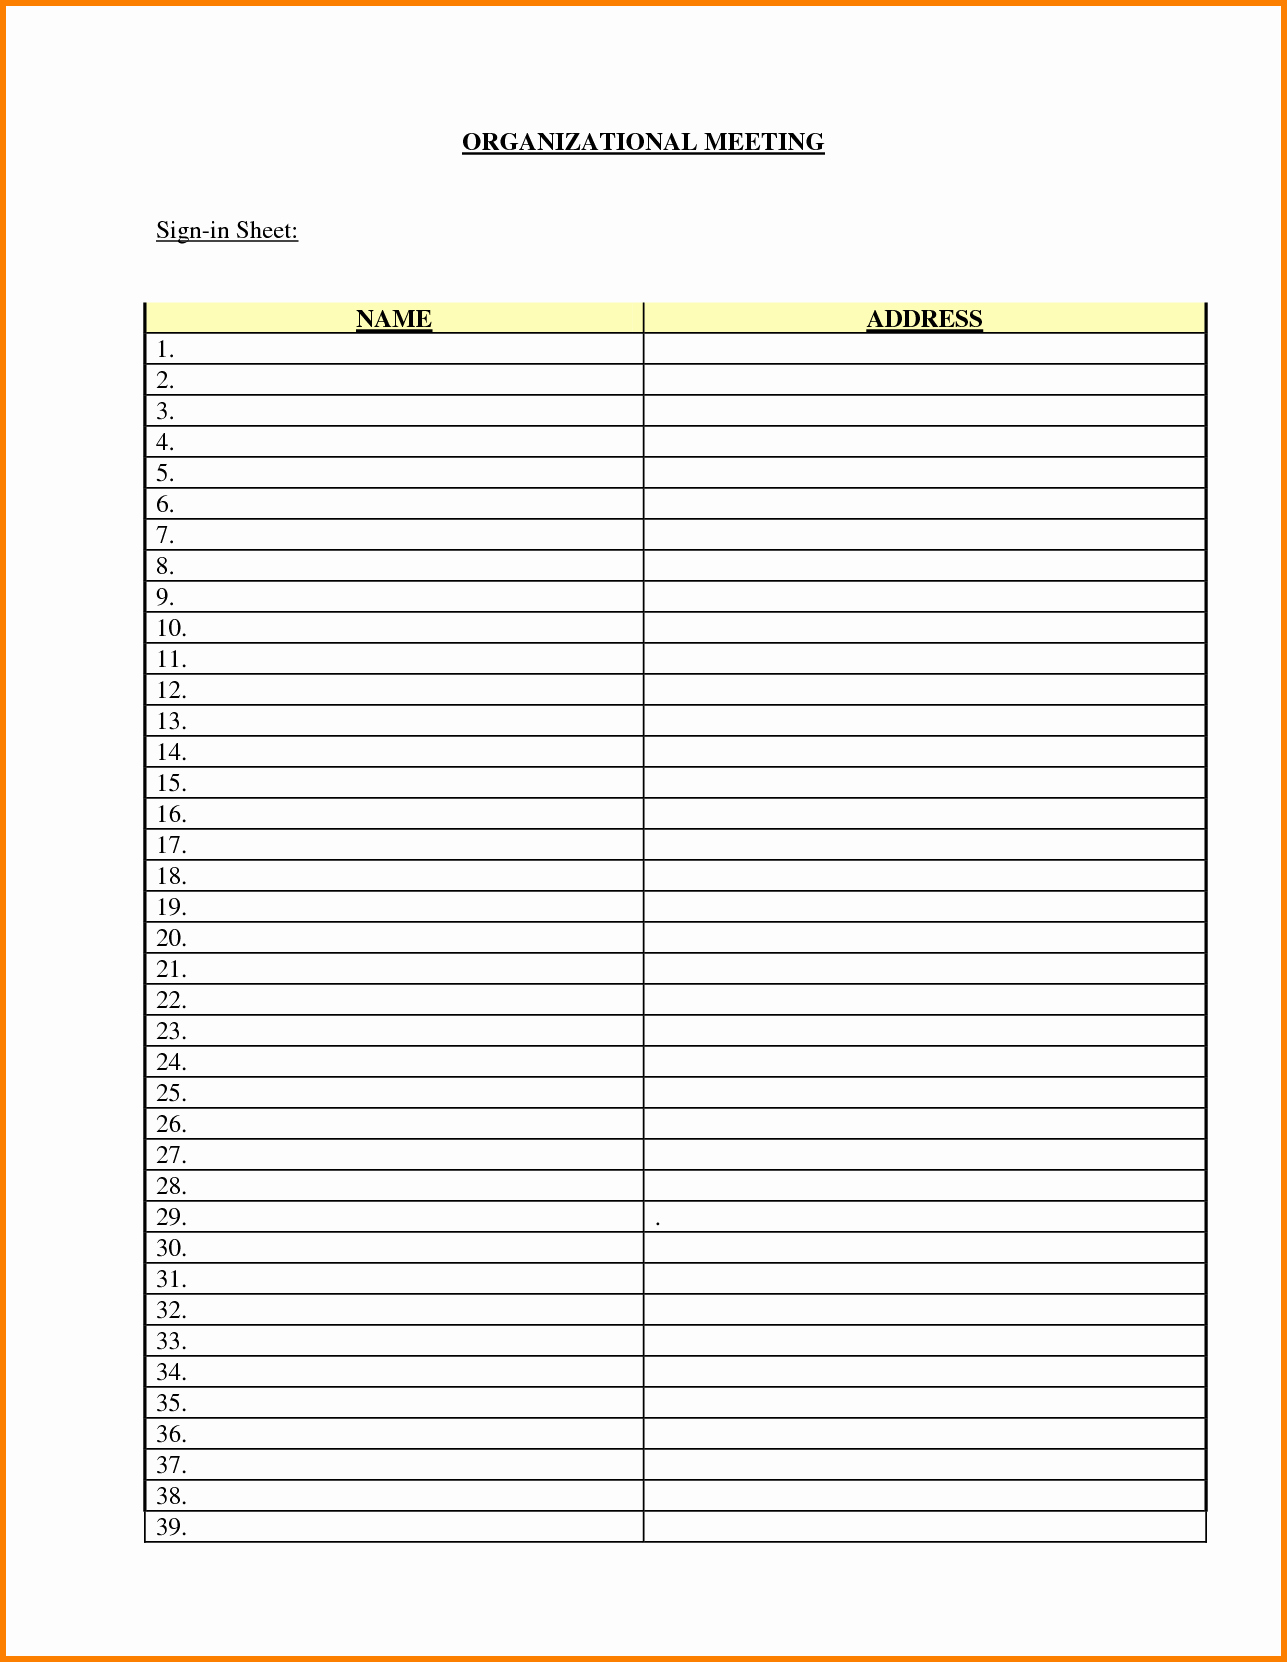 Sign In Sheet Template Free Fresh Search Results for “sign Up Sheet Template Excel